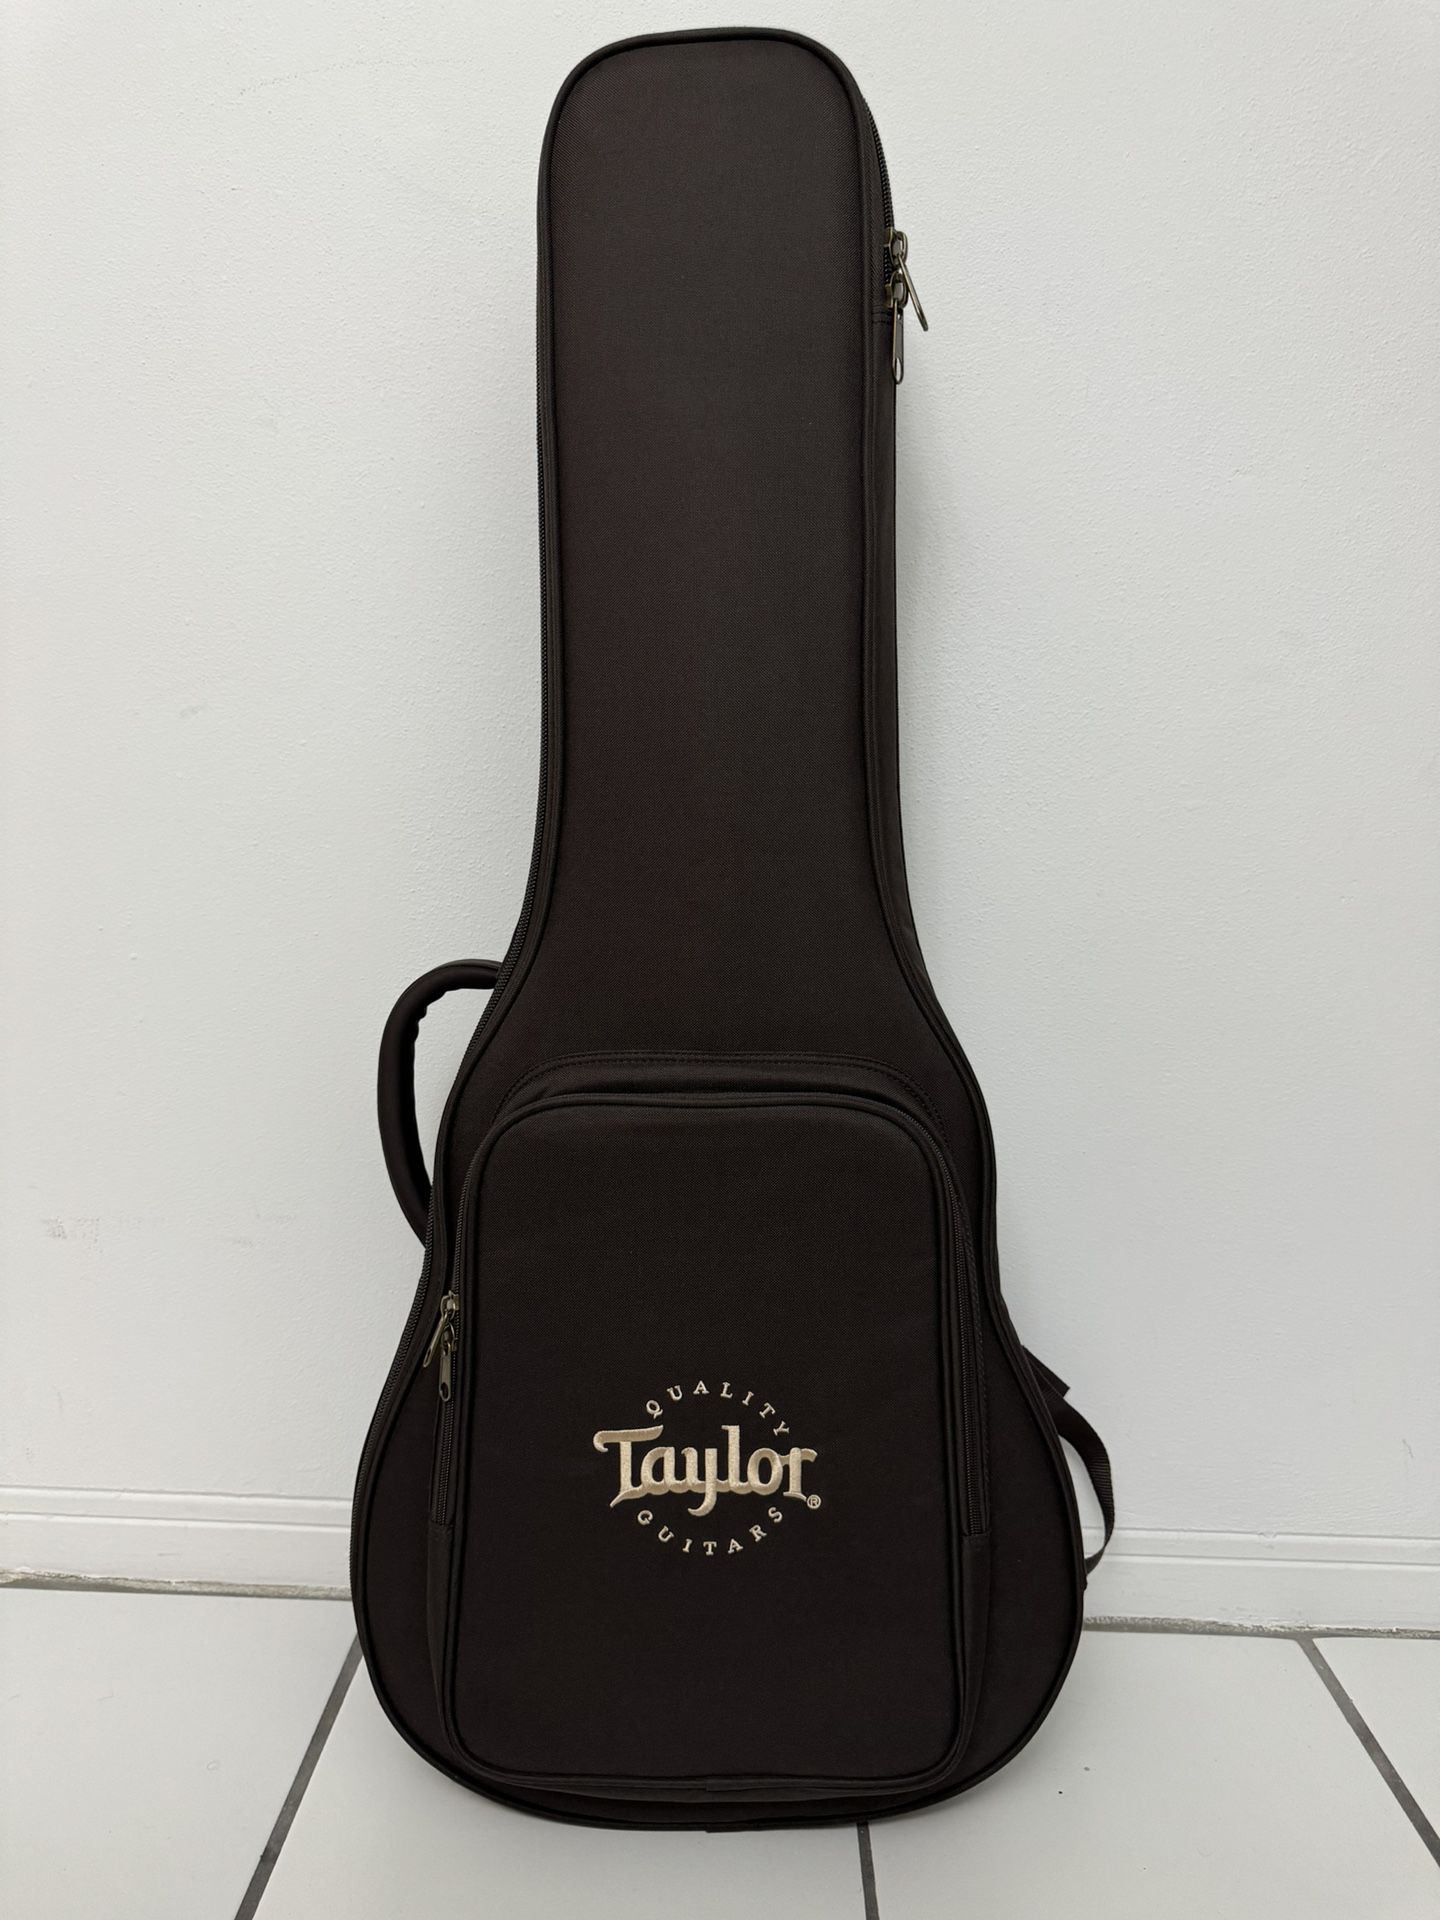 Taylor Grand Case Chocolate Brown